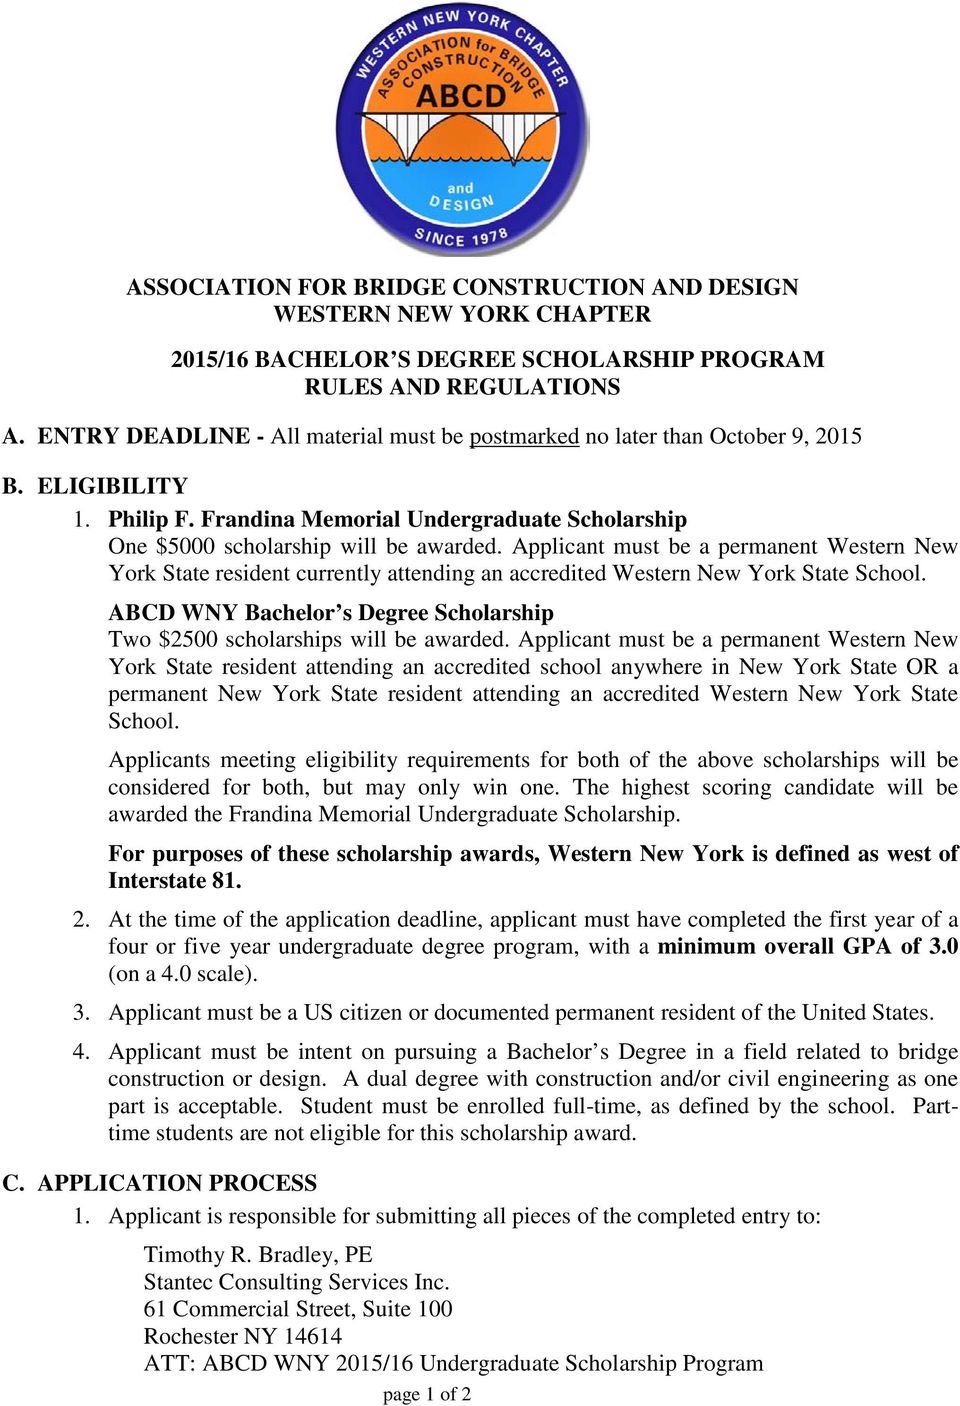 Applicant must be a permanent Western New York State resident currently attending an accredited Western New York State School.